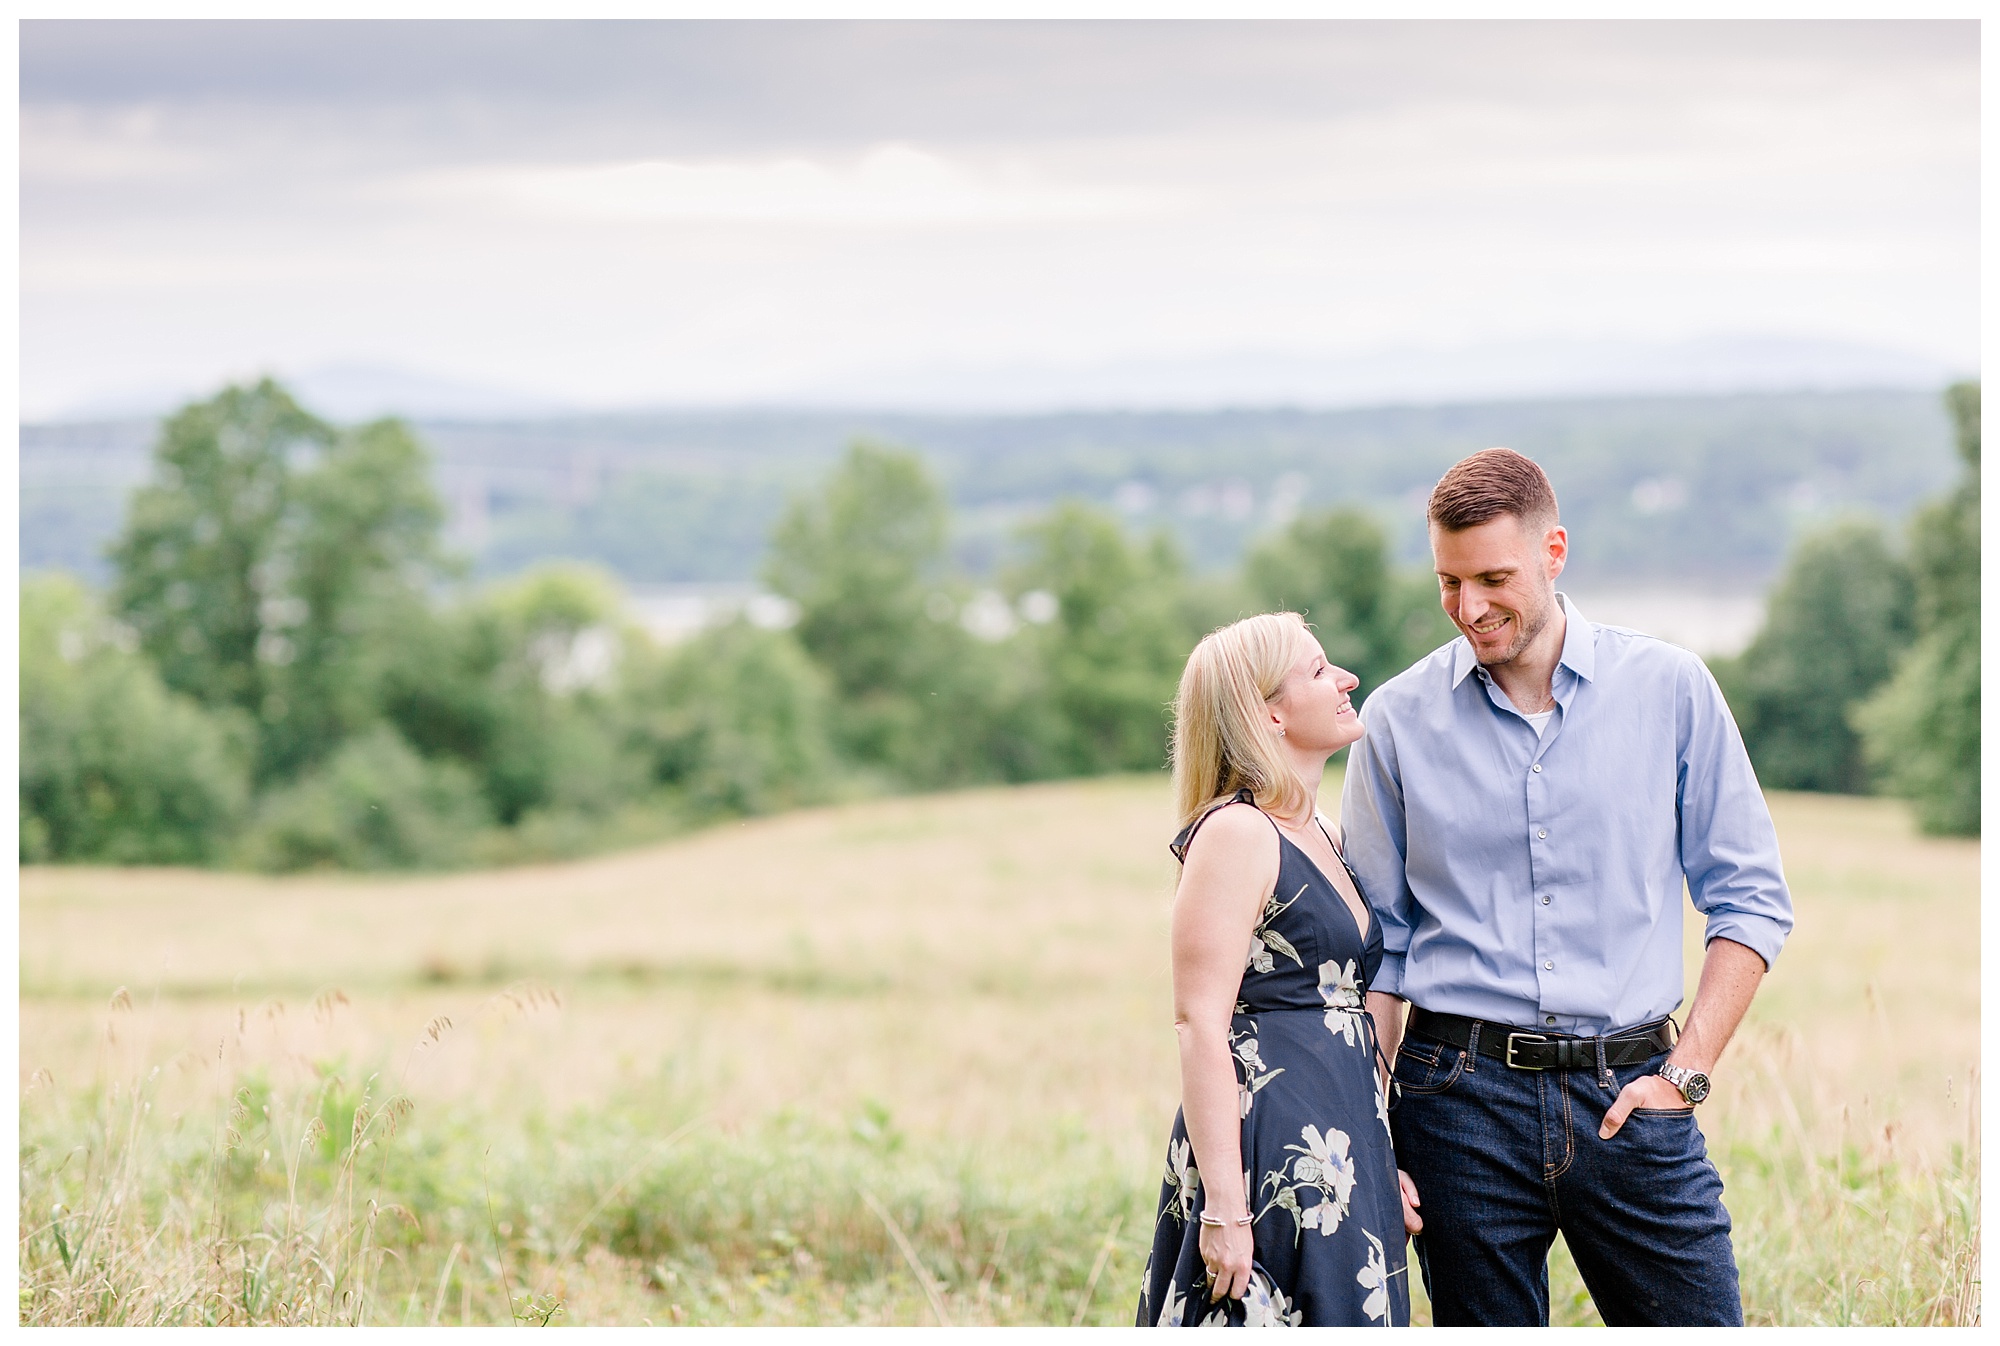 Summer engagement session in the Hudson Valley